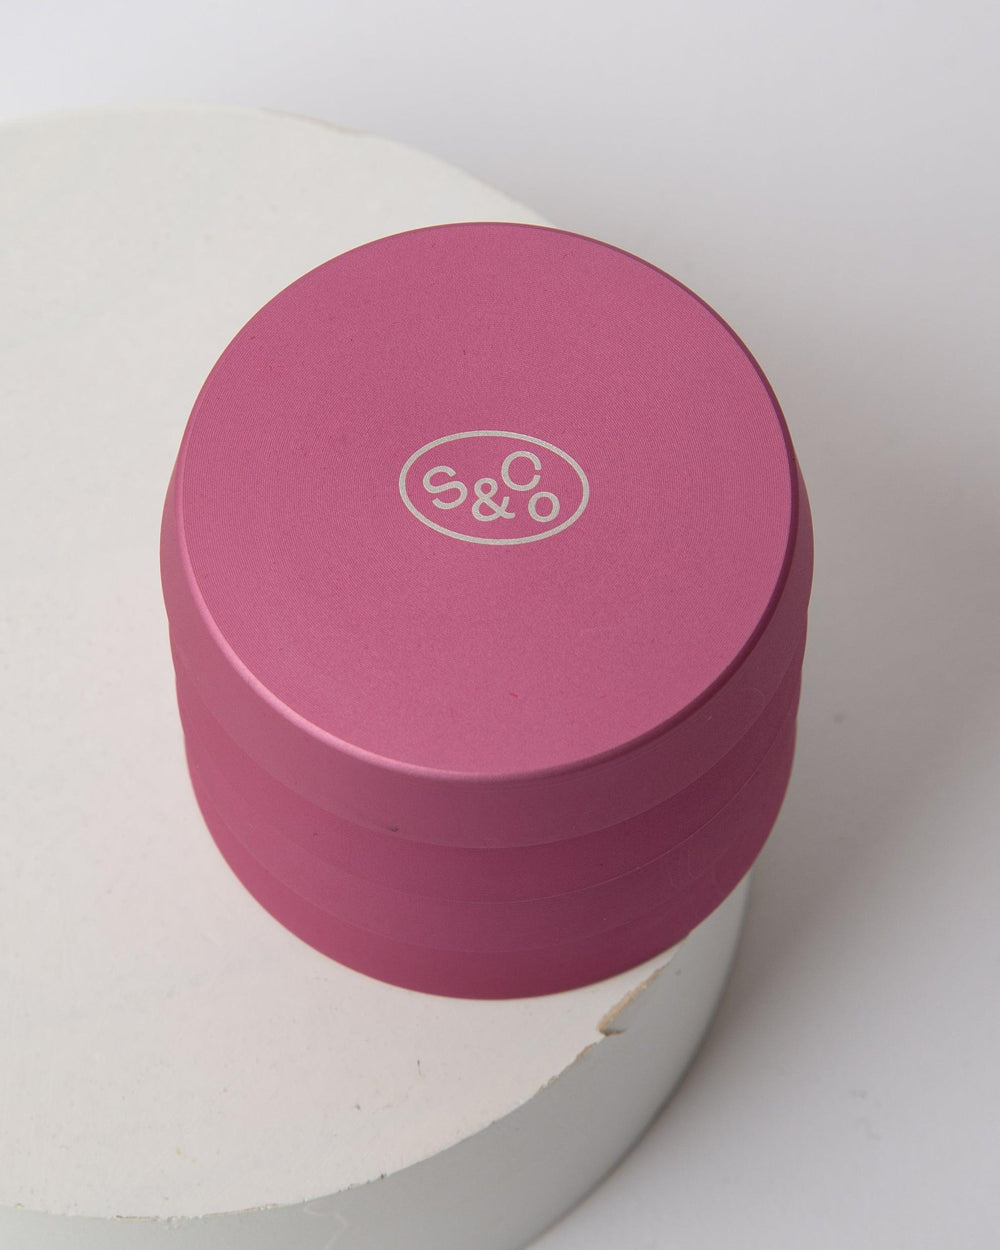 sackville and co aluminum signature grinder pink